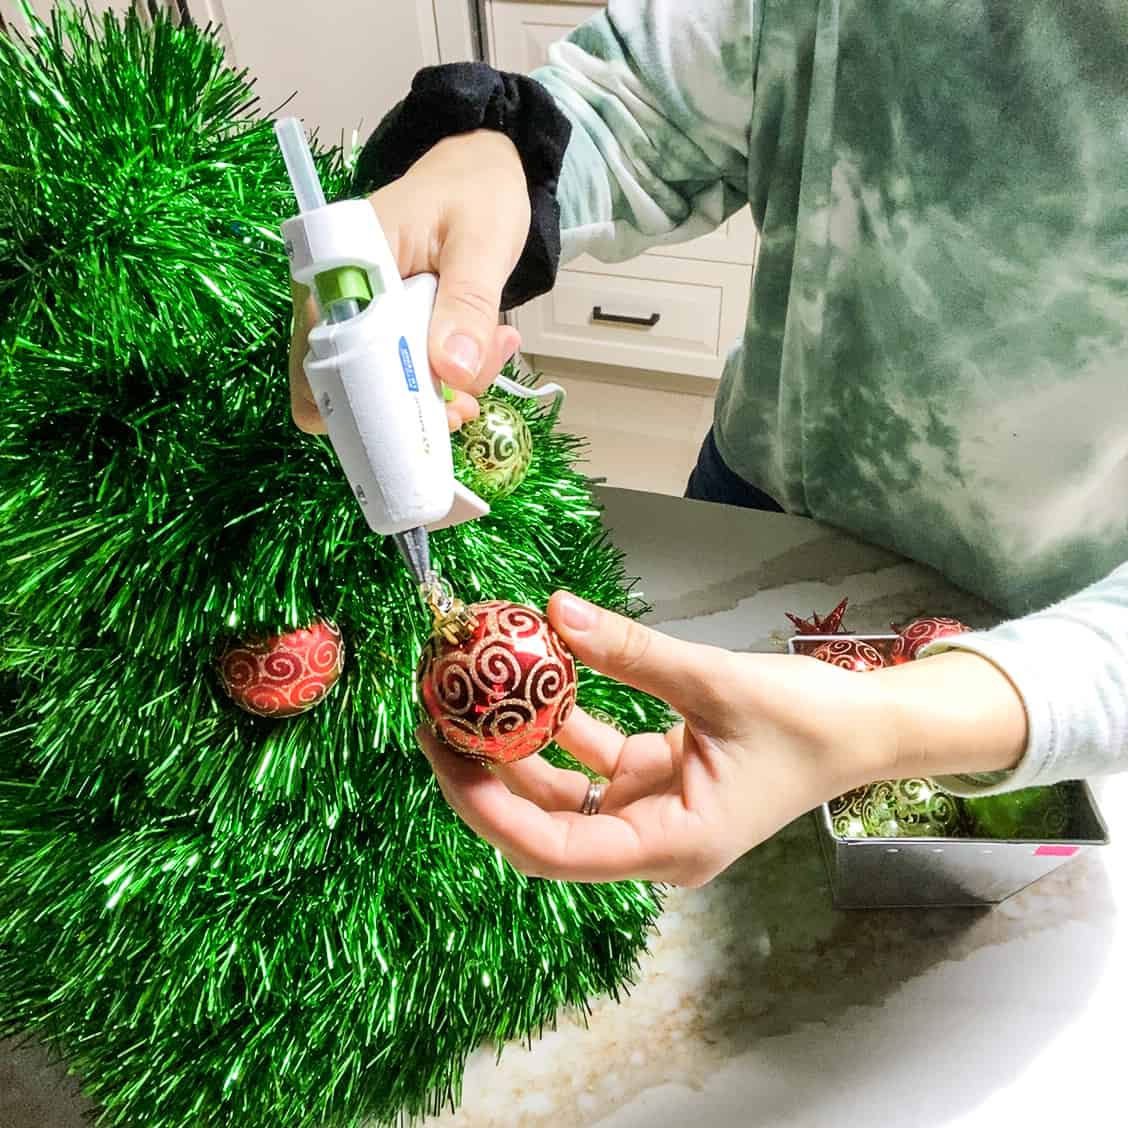 Squeezing hot glue onto the end of a Christmas ball decoration so that it can be permanently attached to the wire hanger Christmas tree.